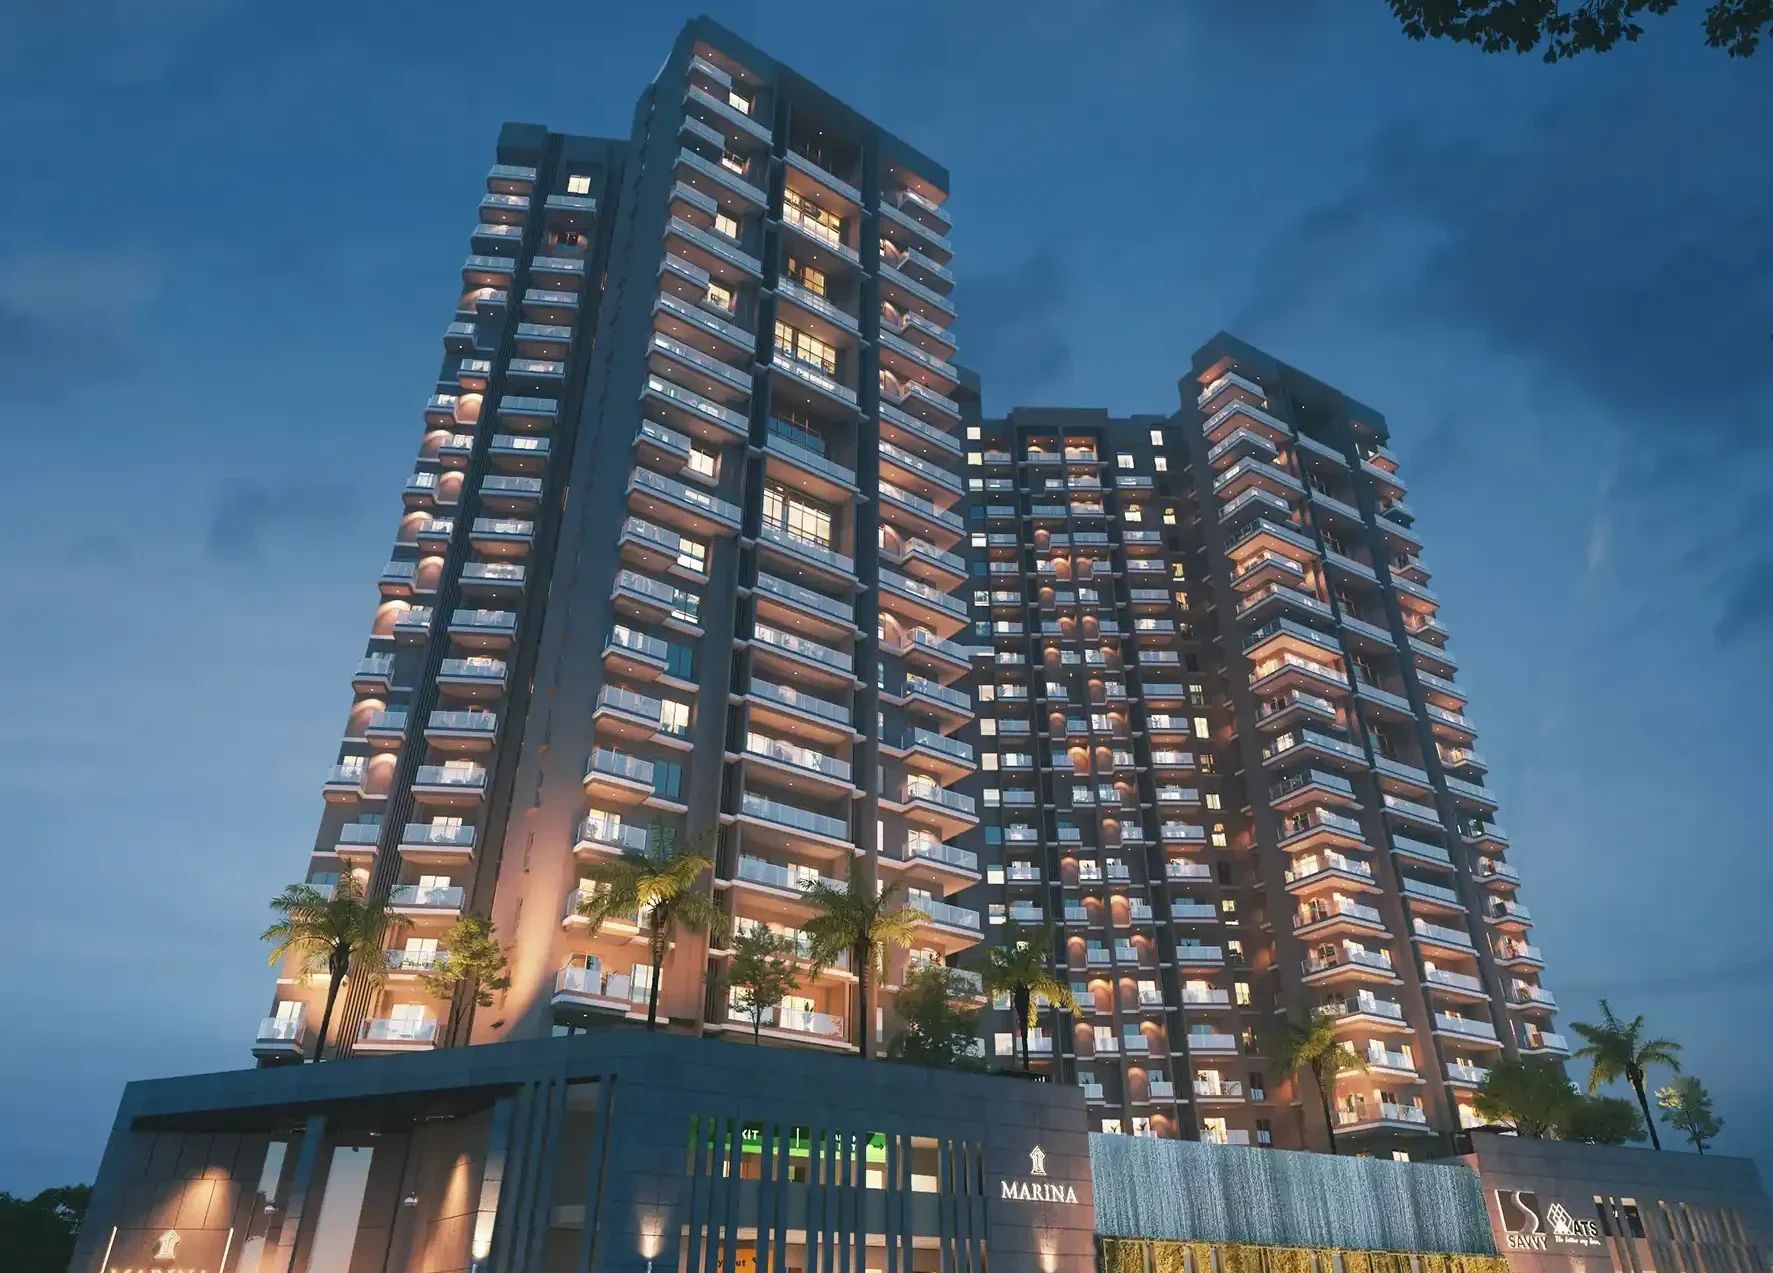 MARINA- Waterfront Living : 4 BHK Ultra Luxurious Apartments